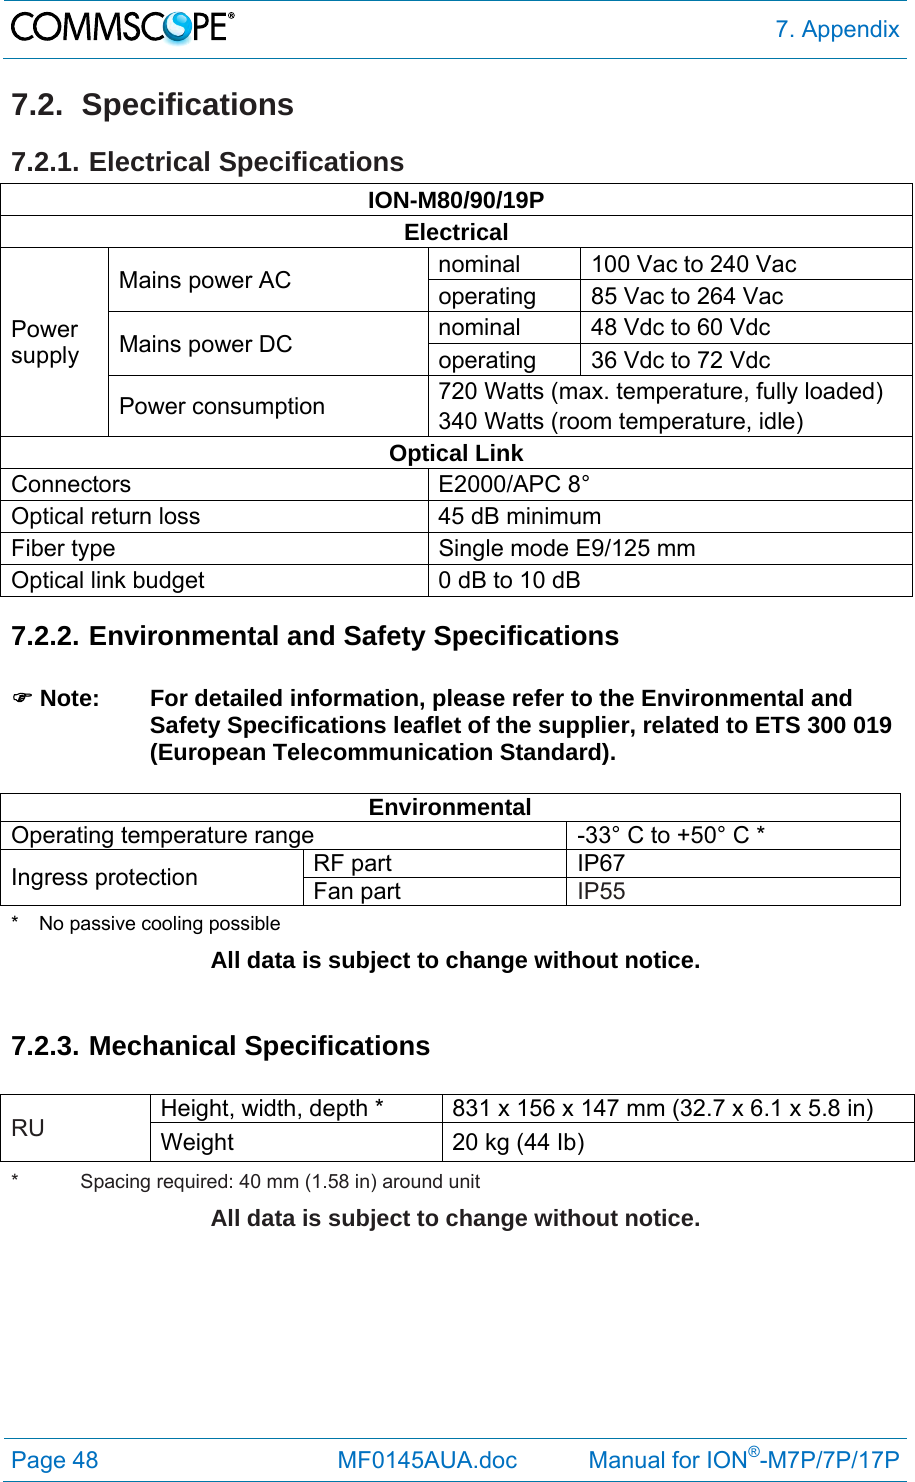  7. Appendix Page 48              MF0145AUA.doc           Manual for ION®-M7P/7P/17P 7.2. Specifications 7.2.1. Electrical Specifications ION-M80/90/19P Electrical Power supply Mains power AC  nominal  100 Vac to 240 Vac operating  85 Vac to 264 Vac Mains power DC  nominal  48 Vdc to 60 Vdc operating  36 Vdc to 72 Vdc Power consumption  720 Watts (max. temperature, fully loaded) 340 Watts (room temperature, idle) Optical Link Connectors E2000/APC 8°  Optical return loss  45 dB minimum Fiber type  Single mode E9/125 mm Optical link budget  0 dB to 10 dB 7.2.2. Environmental and Safety Specifications    Note:  For detailed information, please refer to the Environmental and Safety Specifications leaflet of the supplier, related to ETS 300 019 (European Telecommunication Standard).  Environmental Operating temperature range  -33° C to +50° C * Ingress protection  RF part  IP67 Fan part IP55 *  No passive cooling possible All data is subject to change without notice.  7.2.3. Mechanical Specifications  RU  Height, width, depth *  831 x 156 x 147 mm (32.7 x 6.1 x 5.8 in) Weight  20 kg (44 Ib) *   Spacing required: 40 mm (1.58 in) around unit All data is subject to change without notice.    